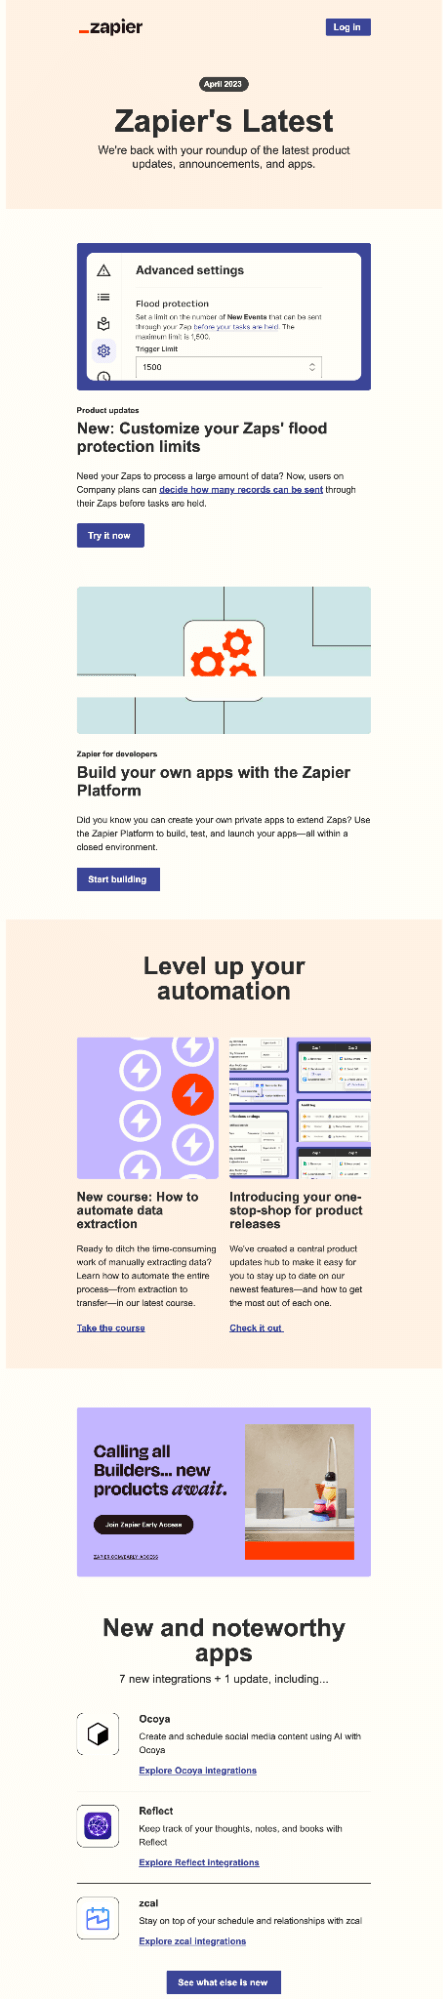 Email Engagement Content Ideas: Screenshot of Zapier's email about their product updates